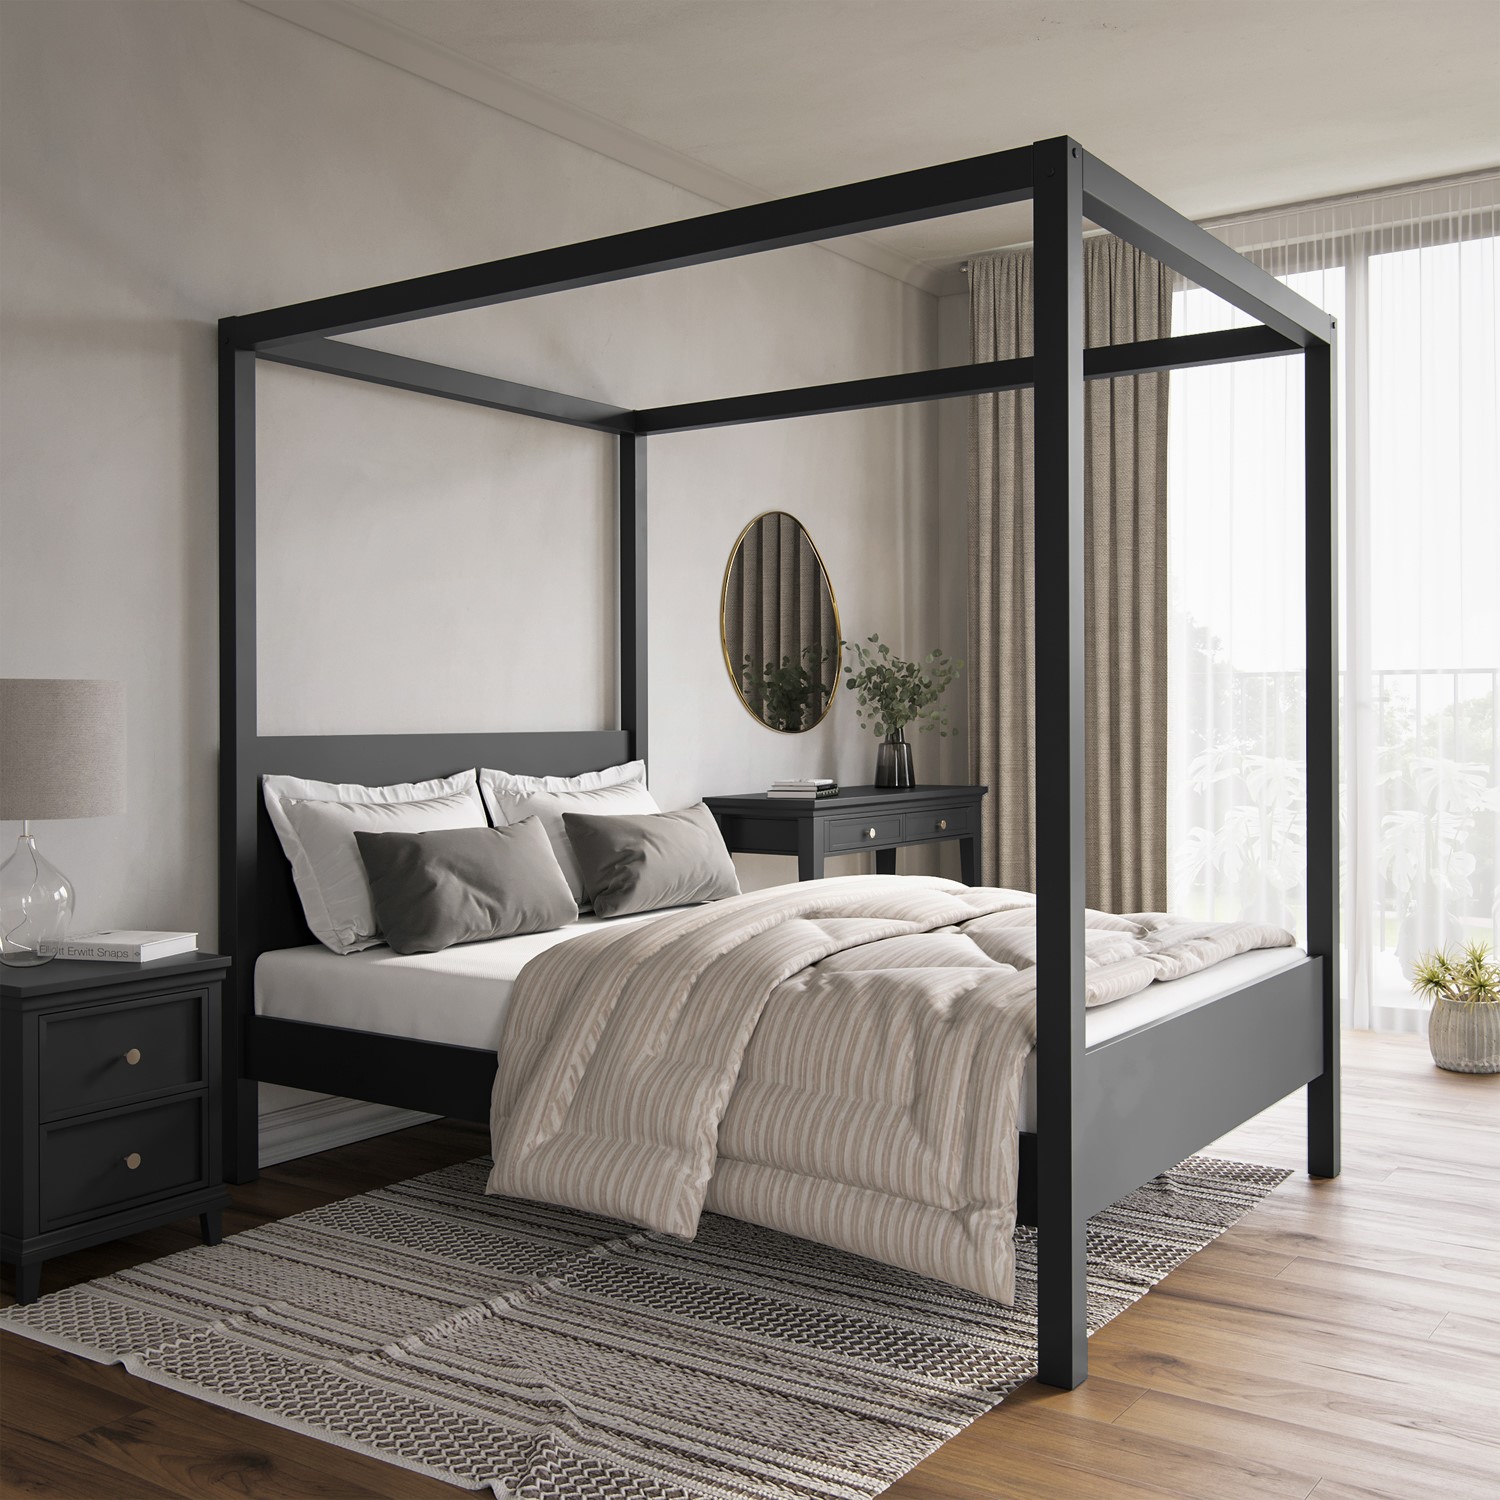 Photo of Double four poster bed frame in black - victoria